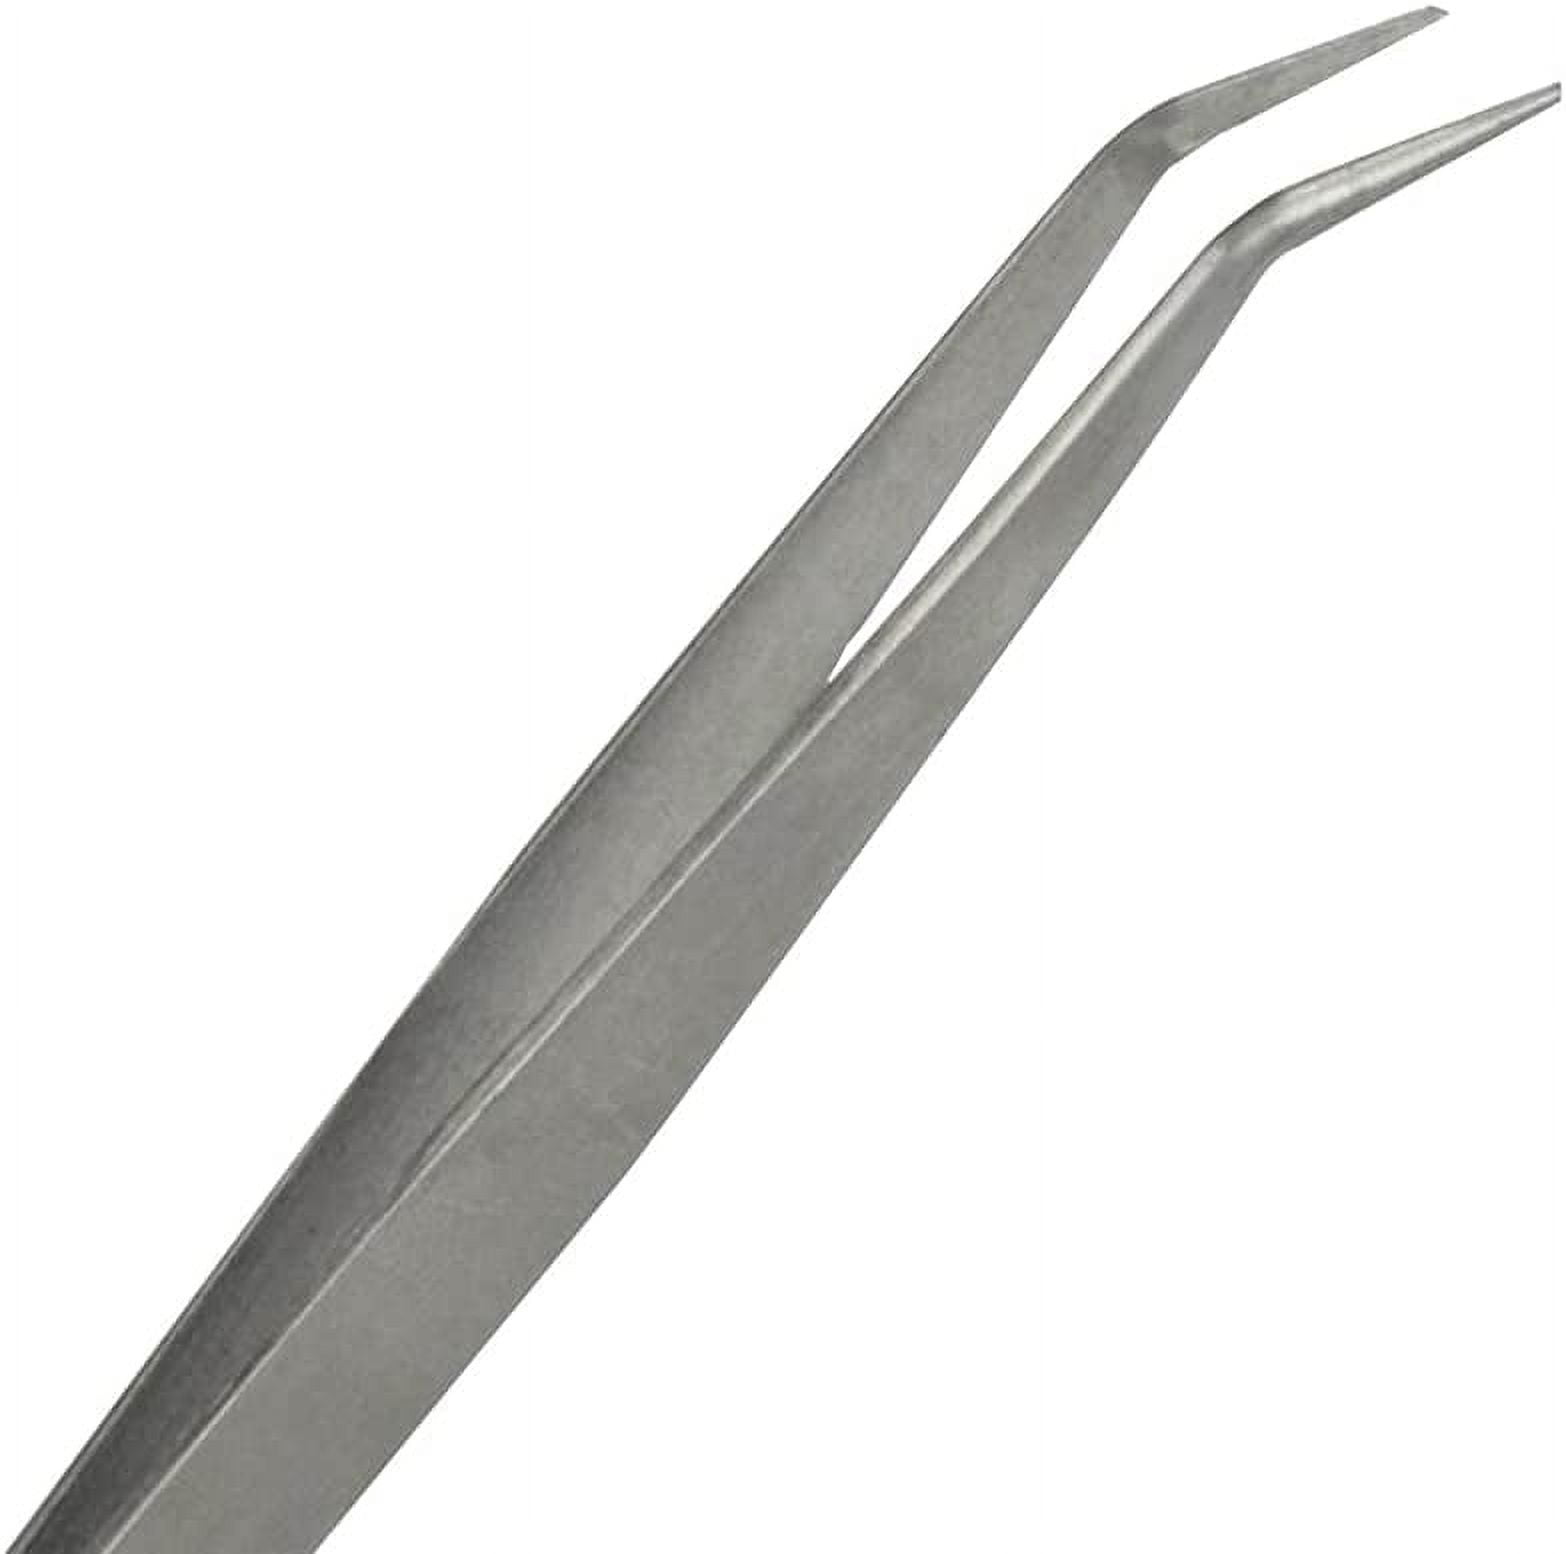 Beading and Knotting Tweezers 7 Inch Stainless Steel with Angled Tips